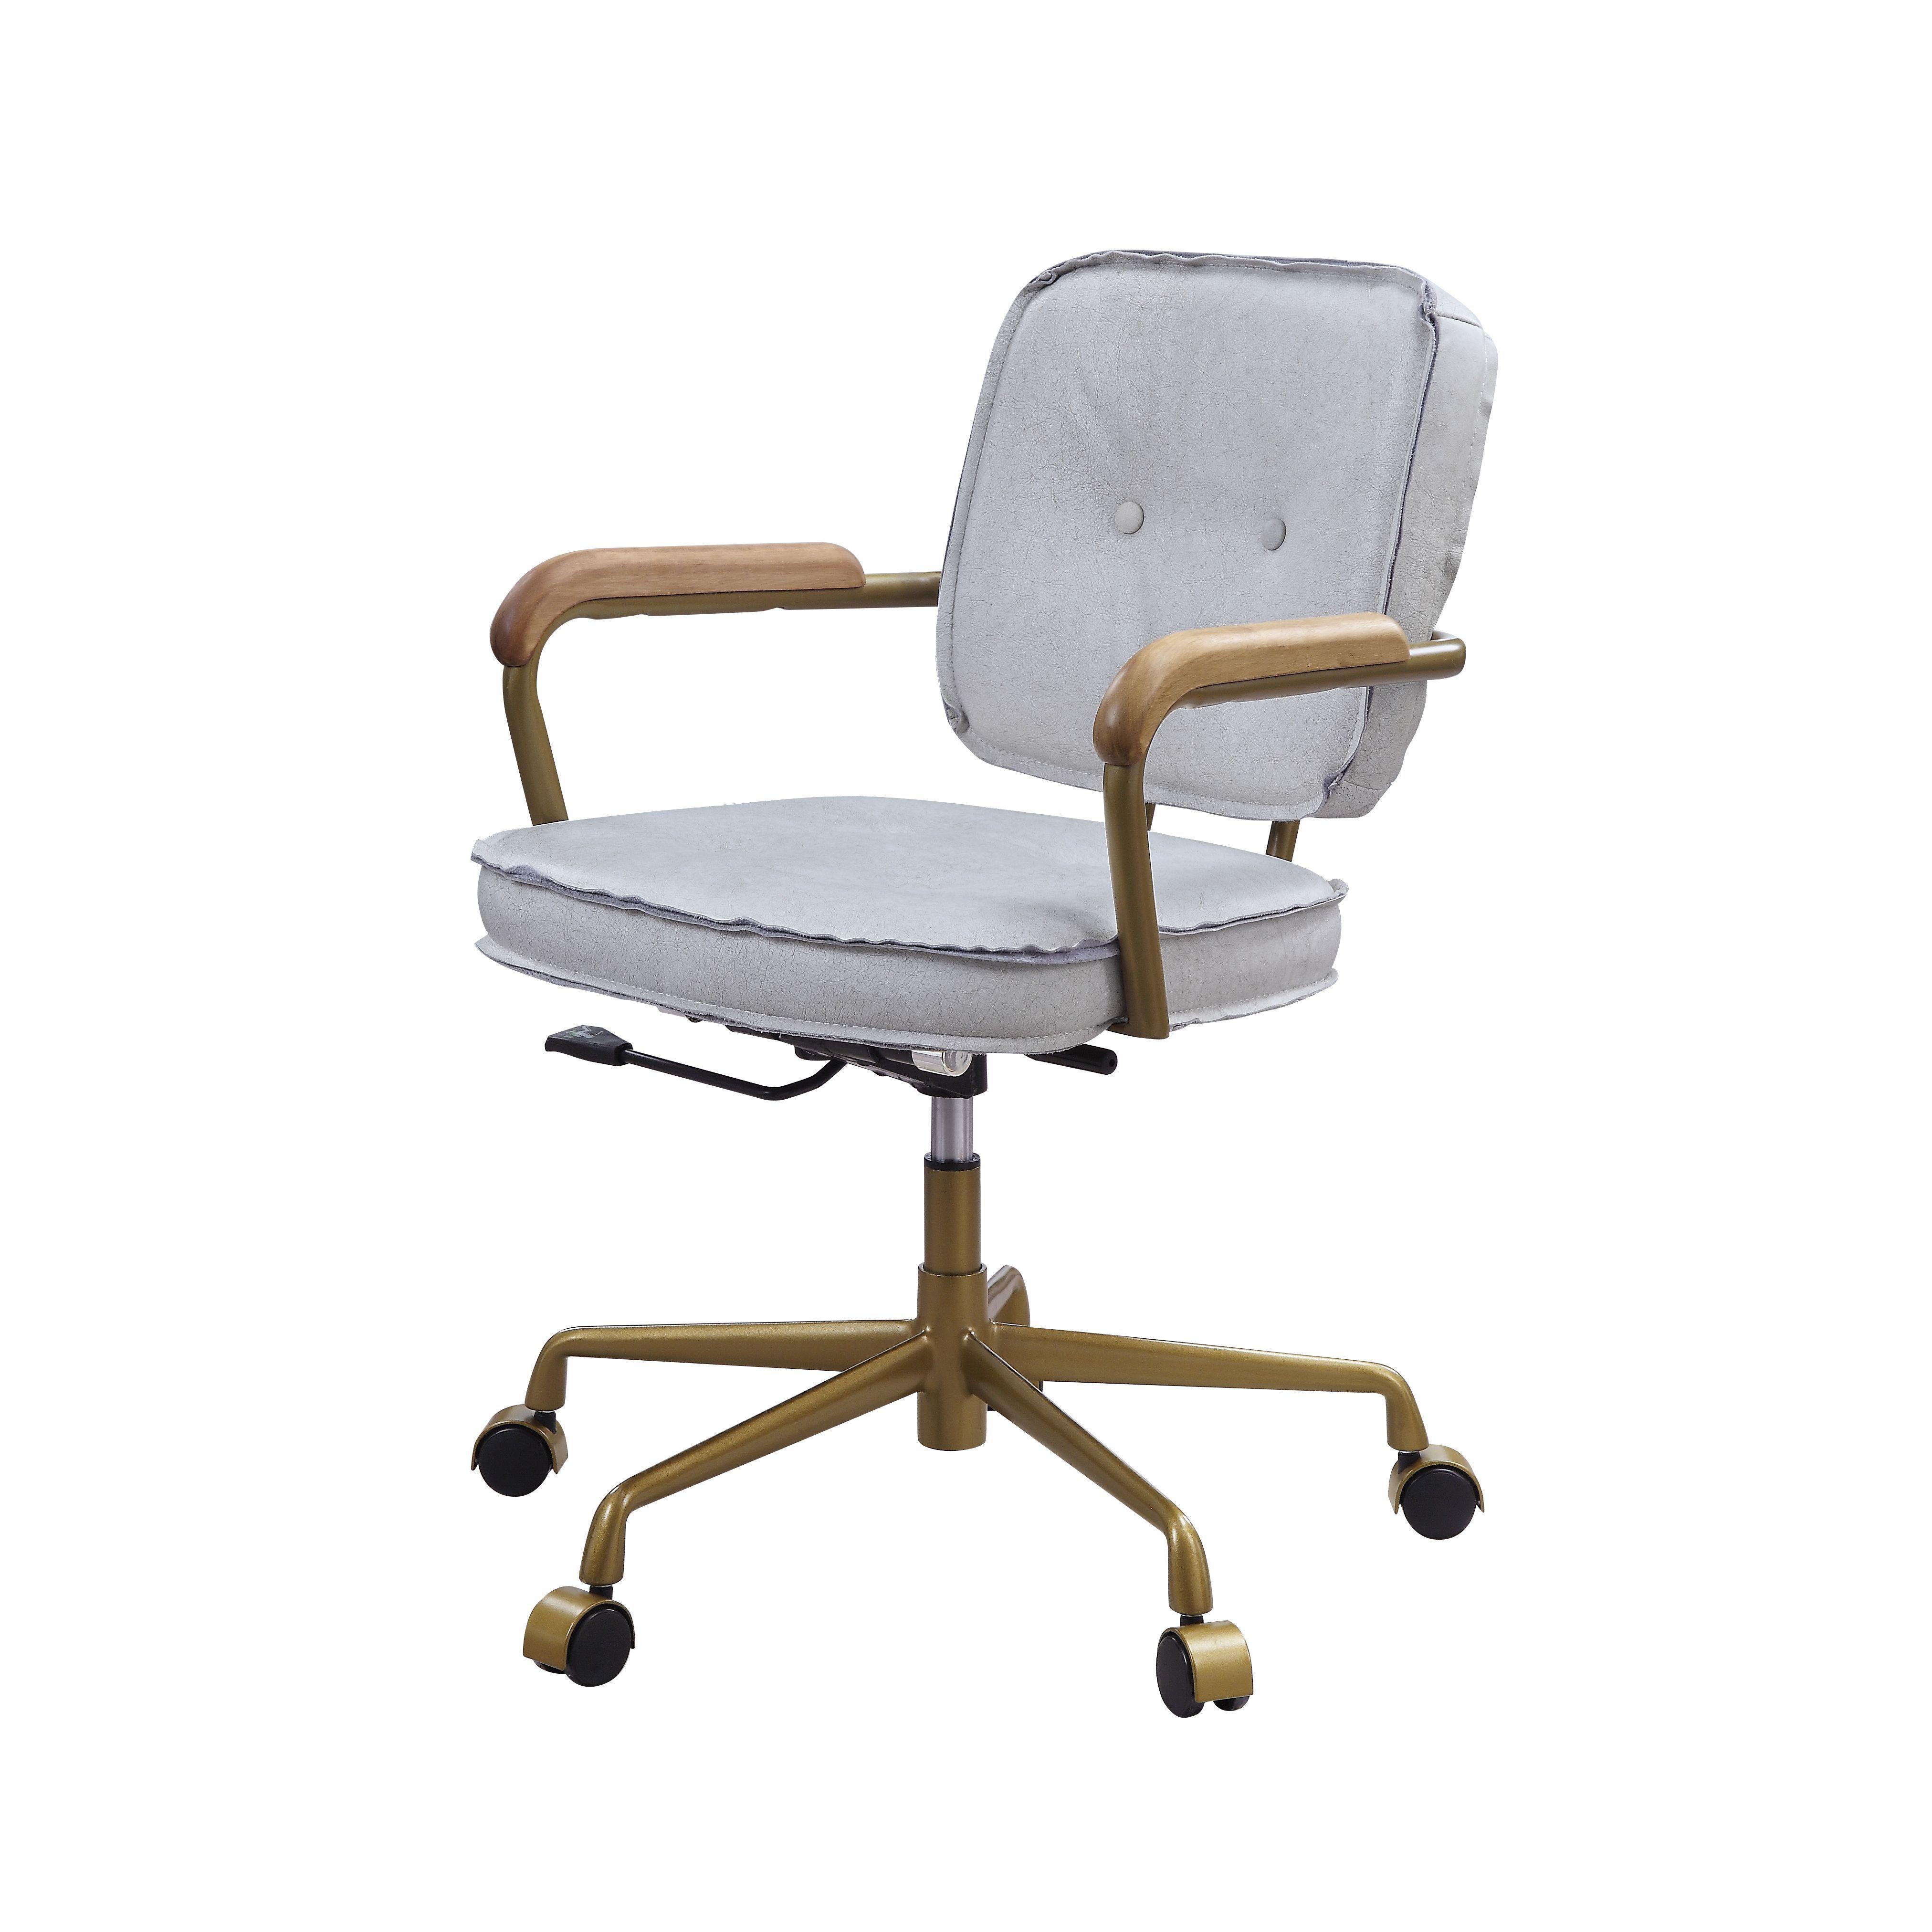 Modern Office Chair Siecross 93172 in Vintage White Top grain leather